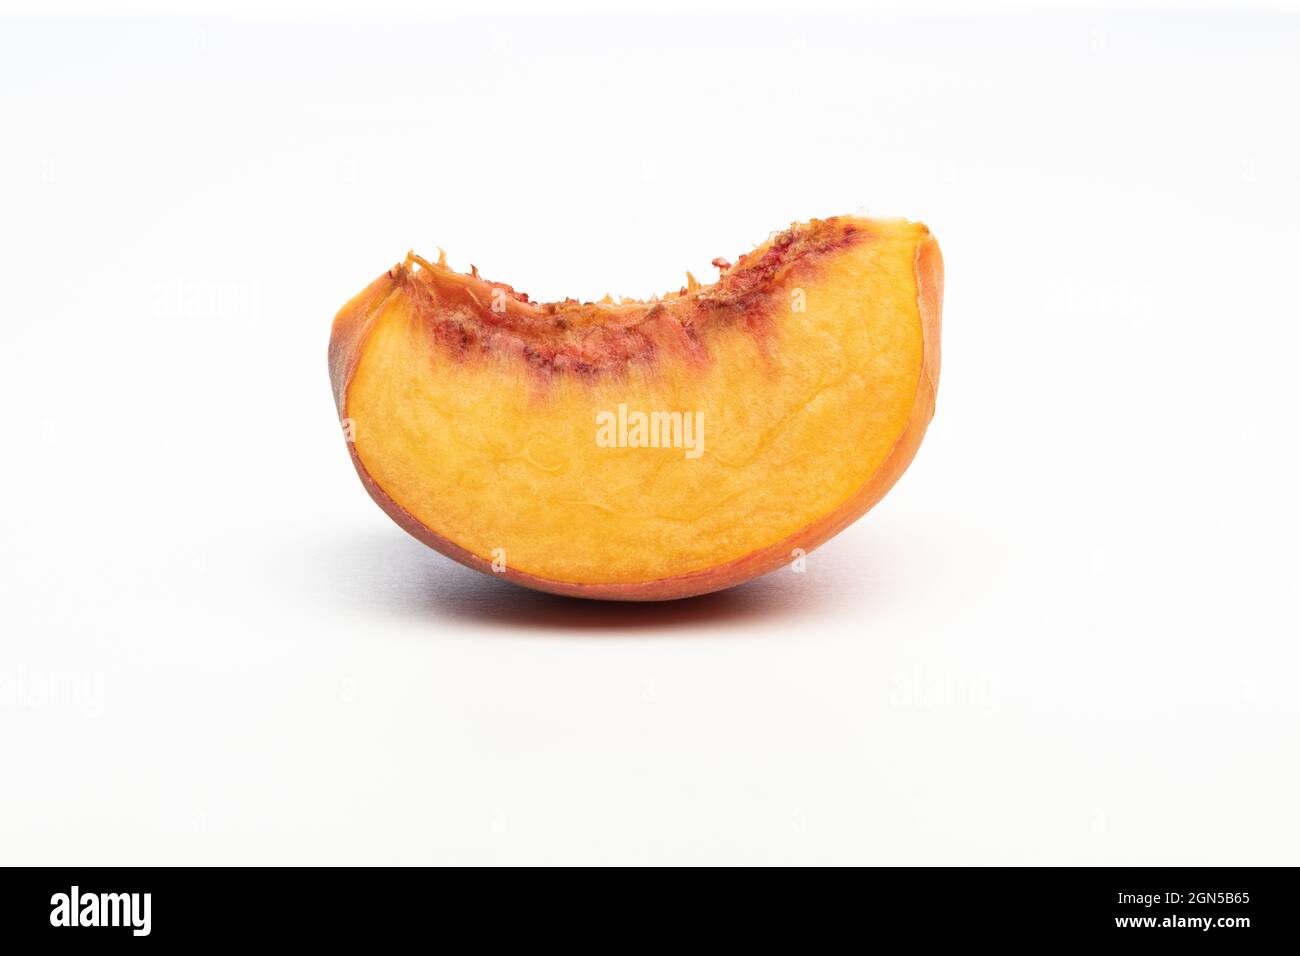 One peach wedge, isolated on white background Stock Photo